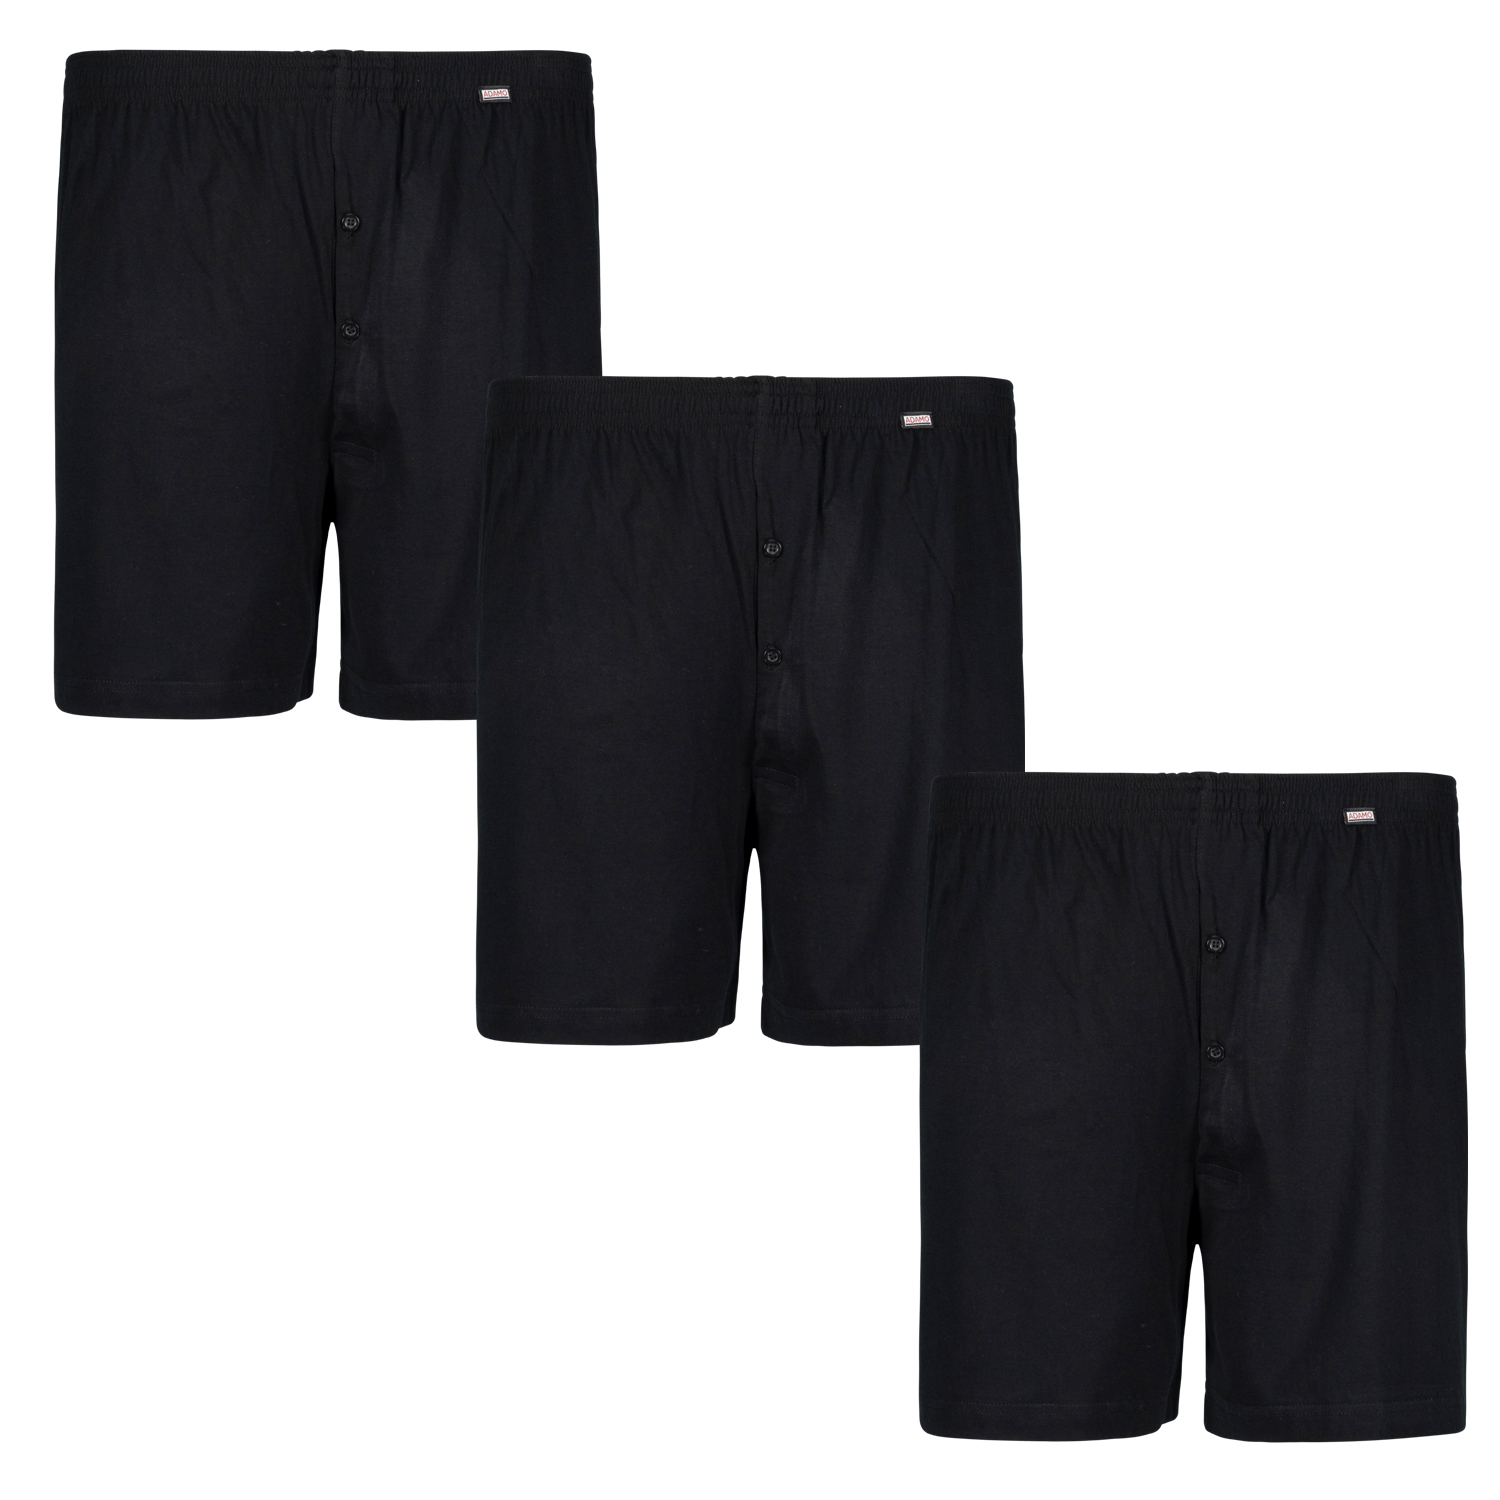 Black triple pack "JAMES" boxershorts by ADAMO in large sizes up to 20